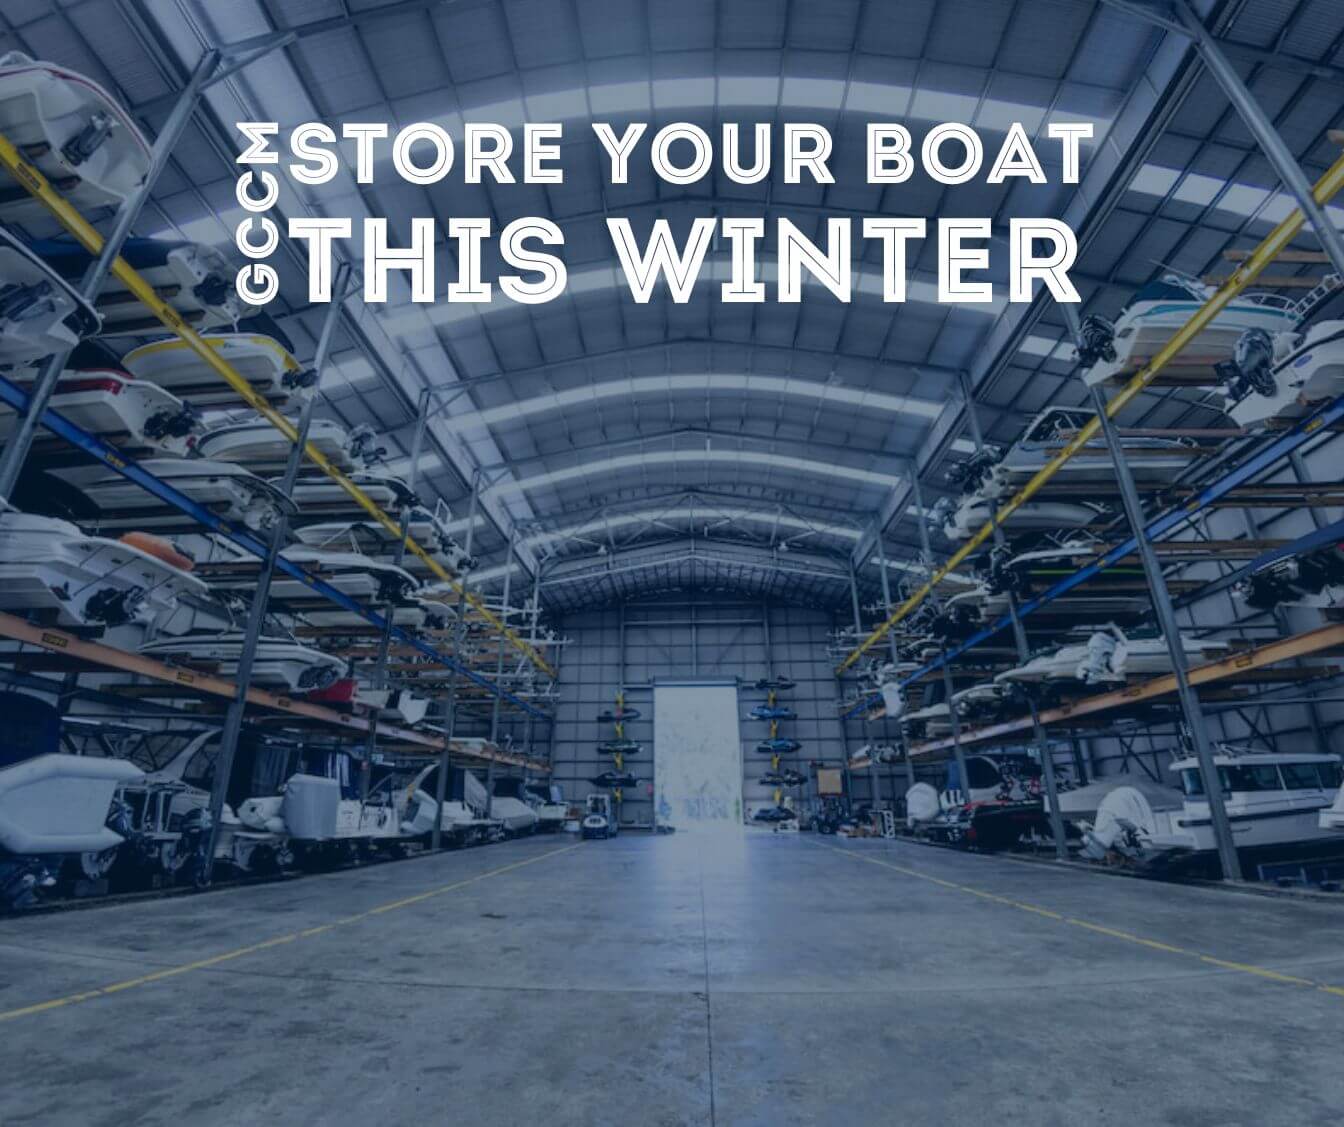 Seasonal Boat Storage Tip: How to Protect Your Vessel During Winter